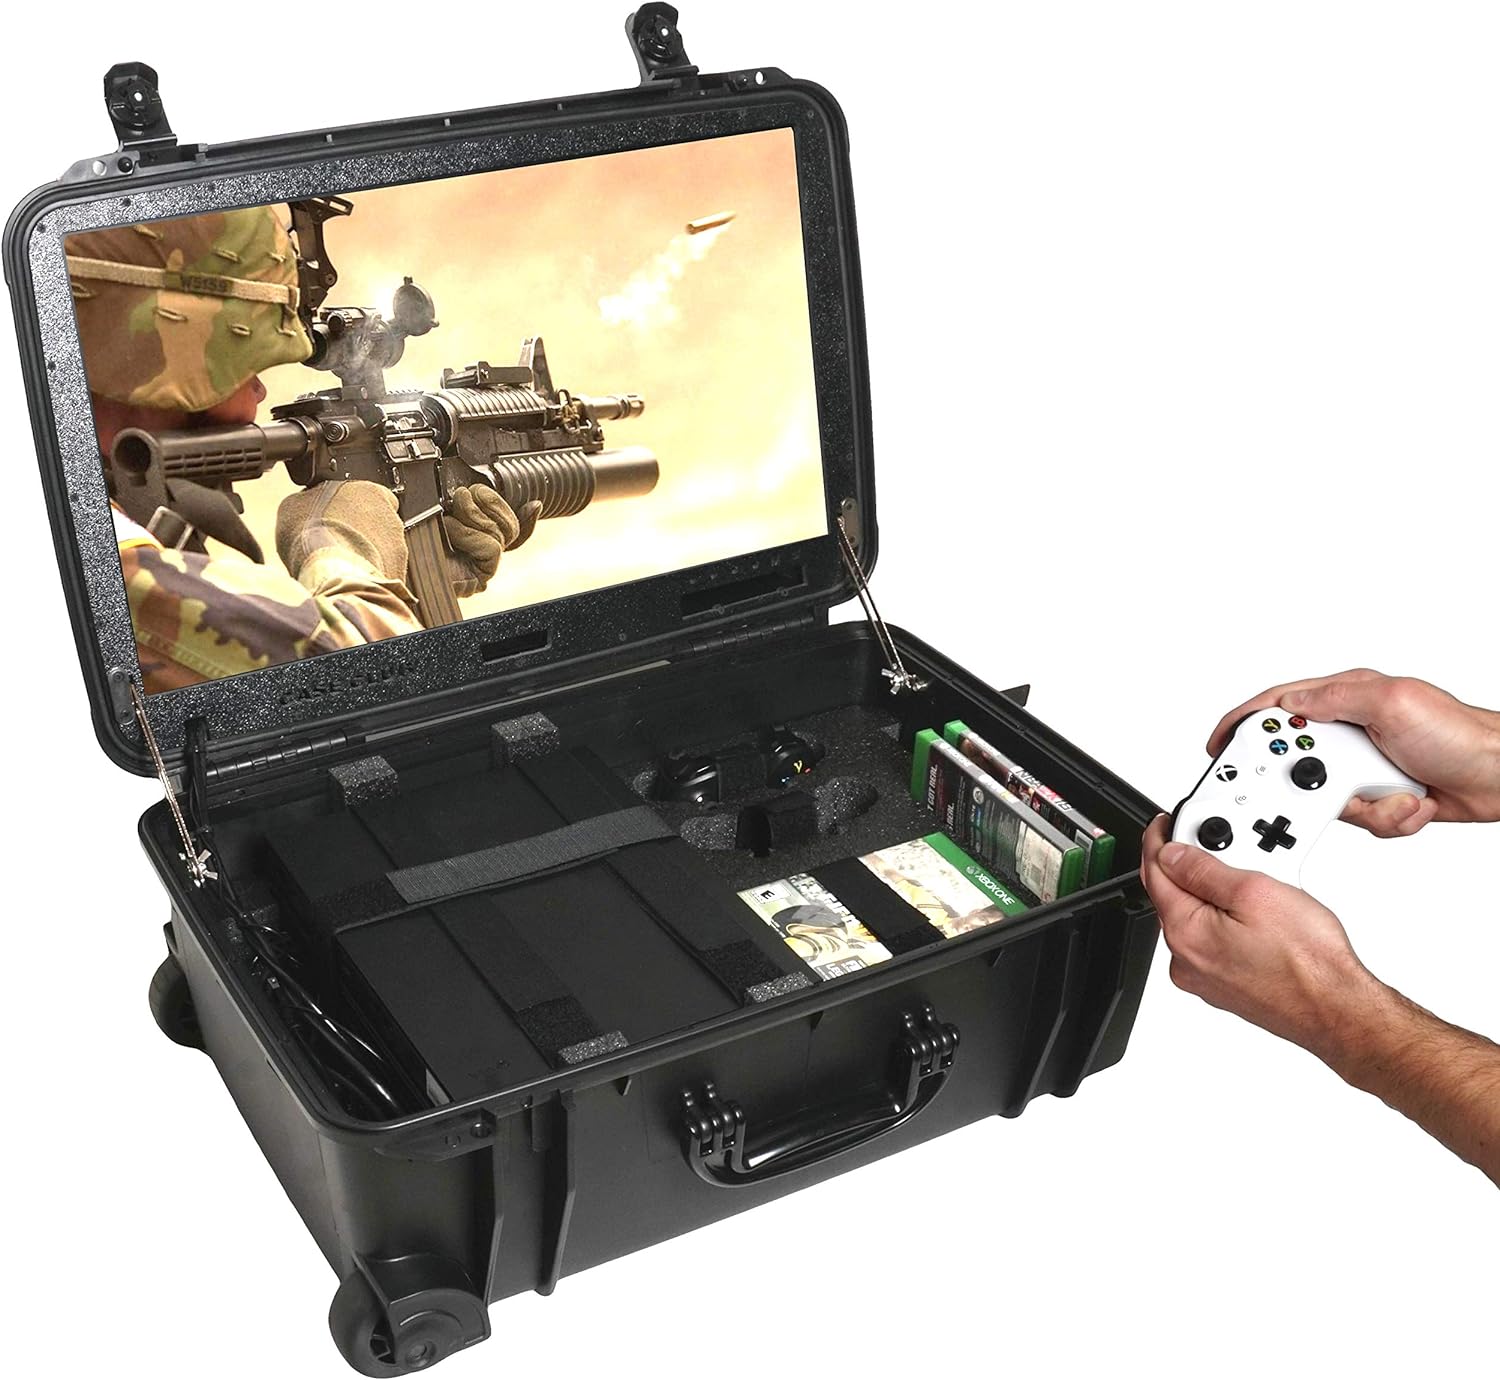 Case Club Waterproof Xbox One X/S Portable Gaming Station with Built-in 24" 1080p Monitor, Storage for Controllers, Games, and Included Speakers (Xbox & Accessories Not Included)